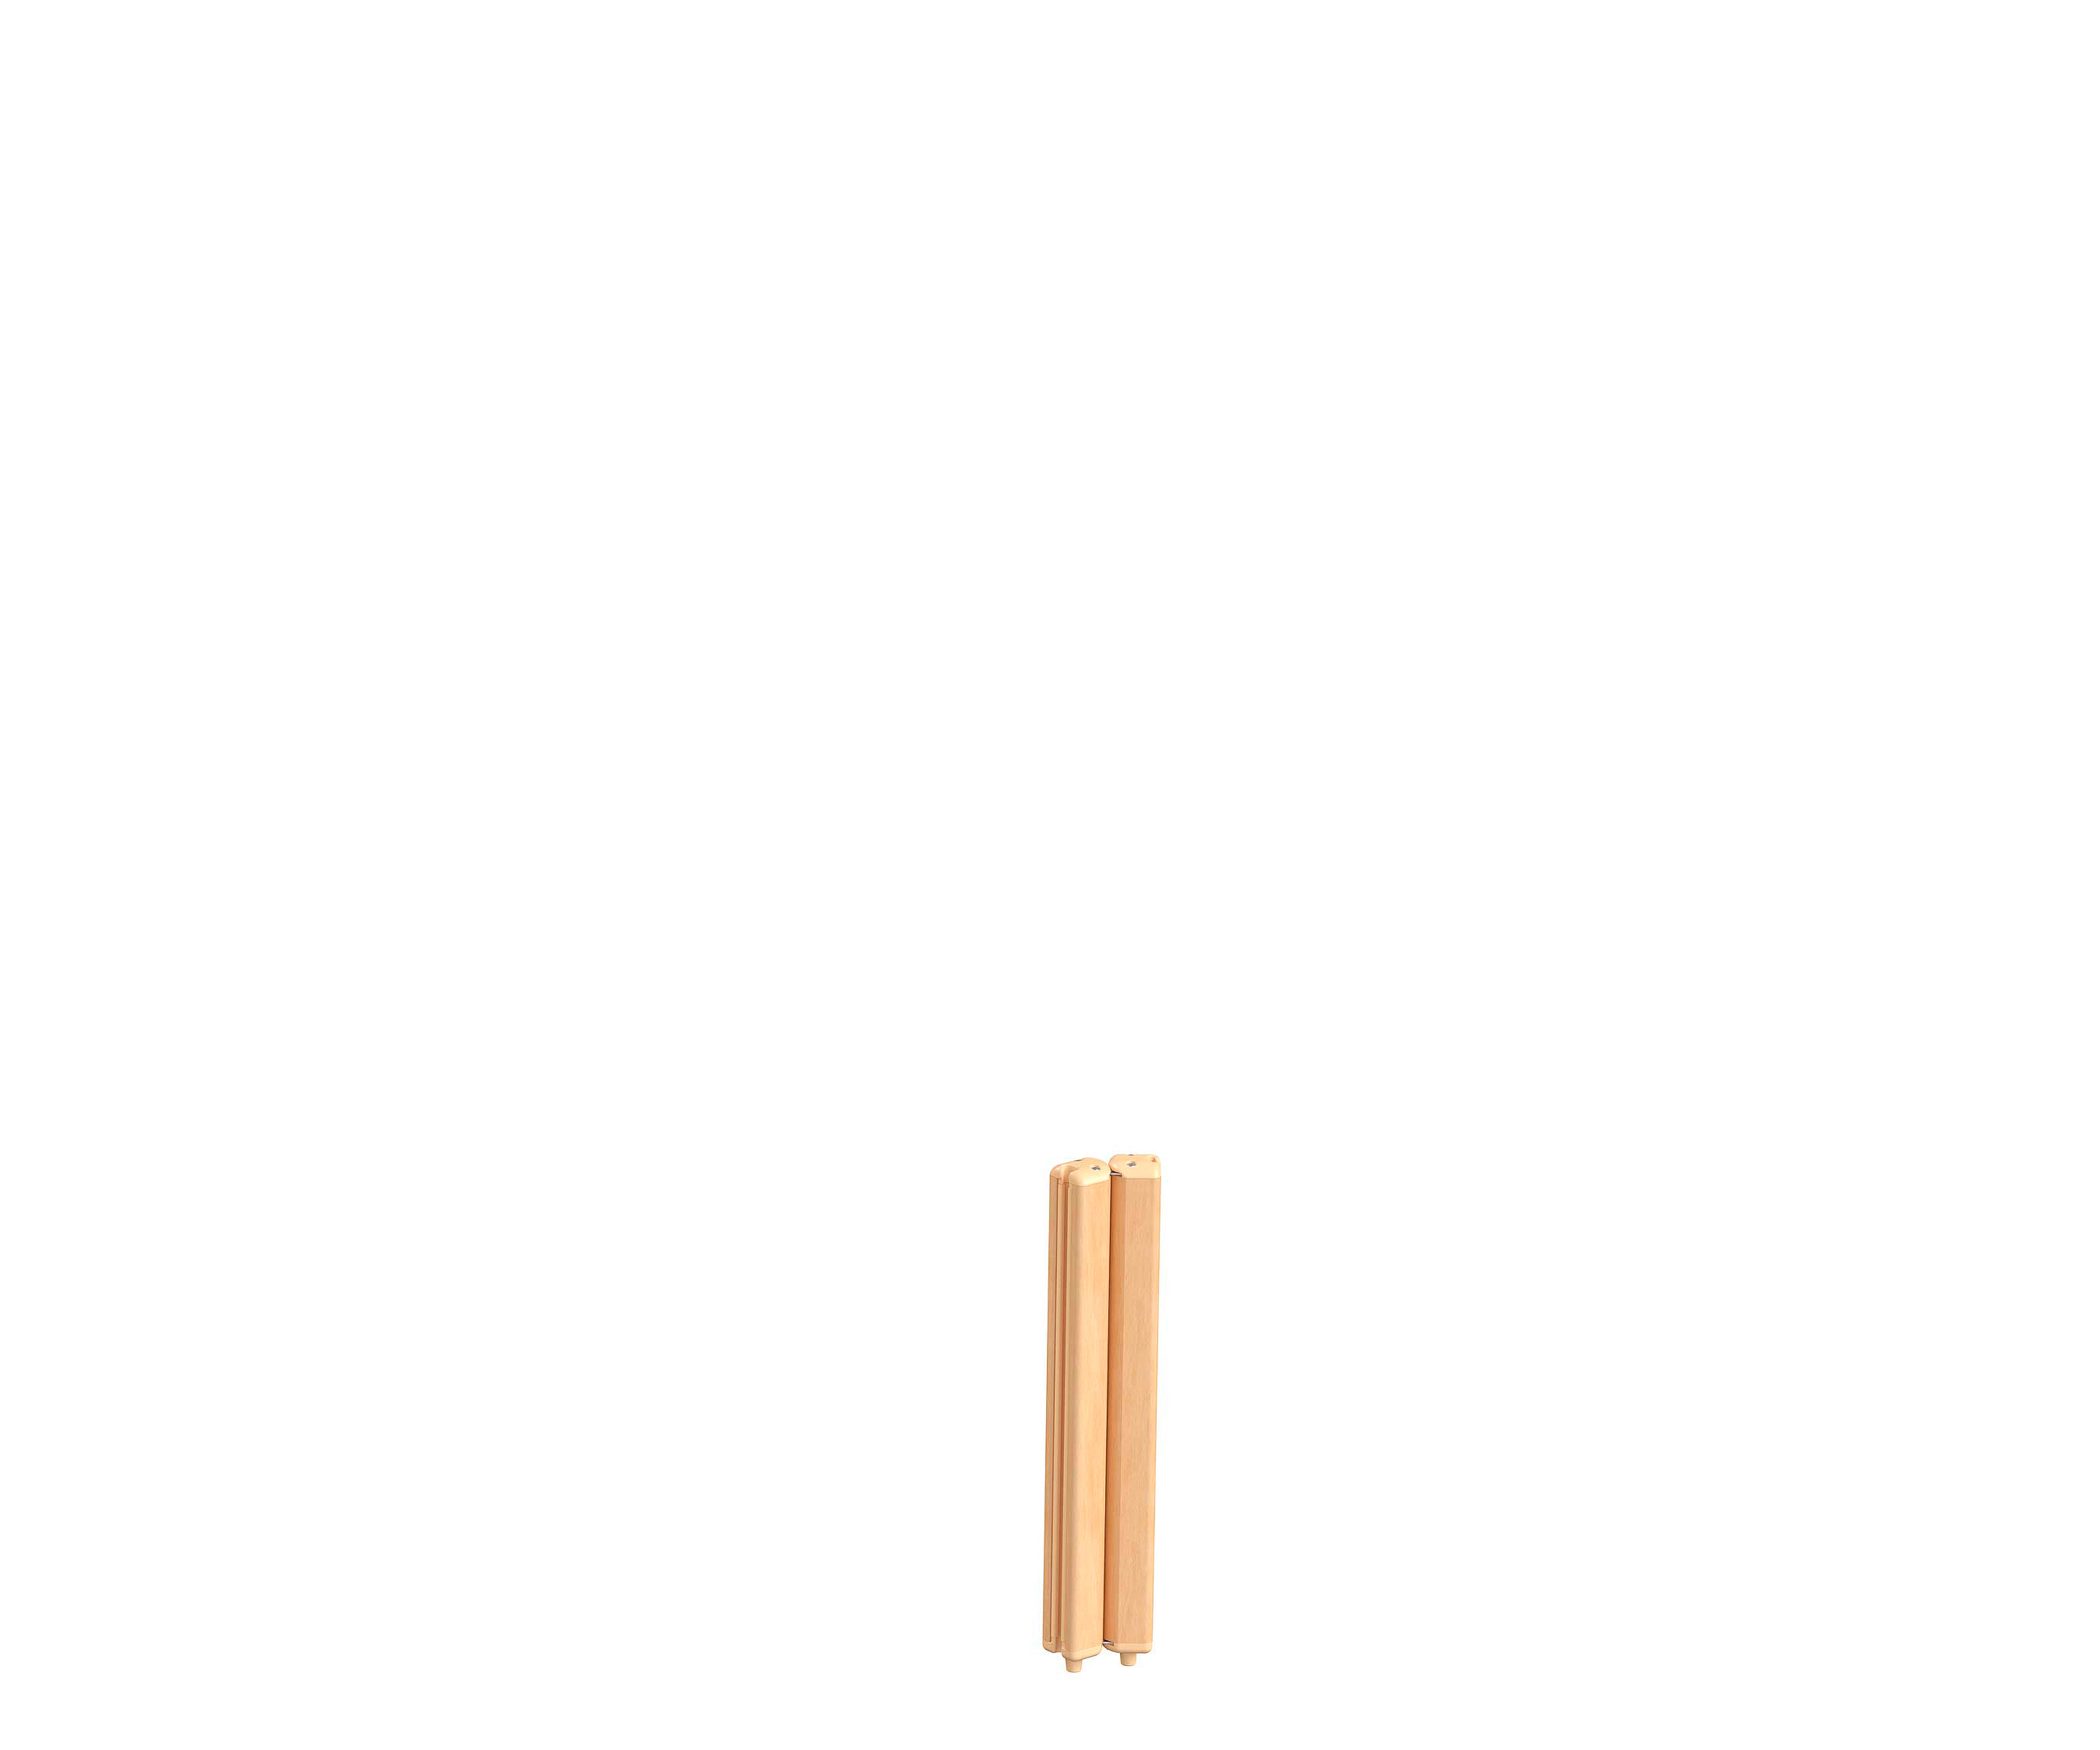 Wooden angled post, 41 cm